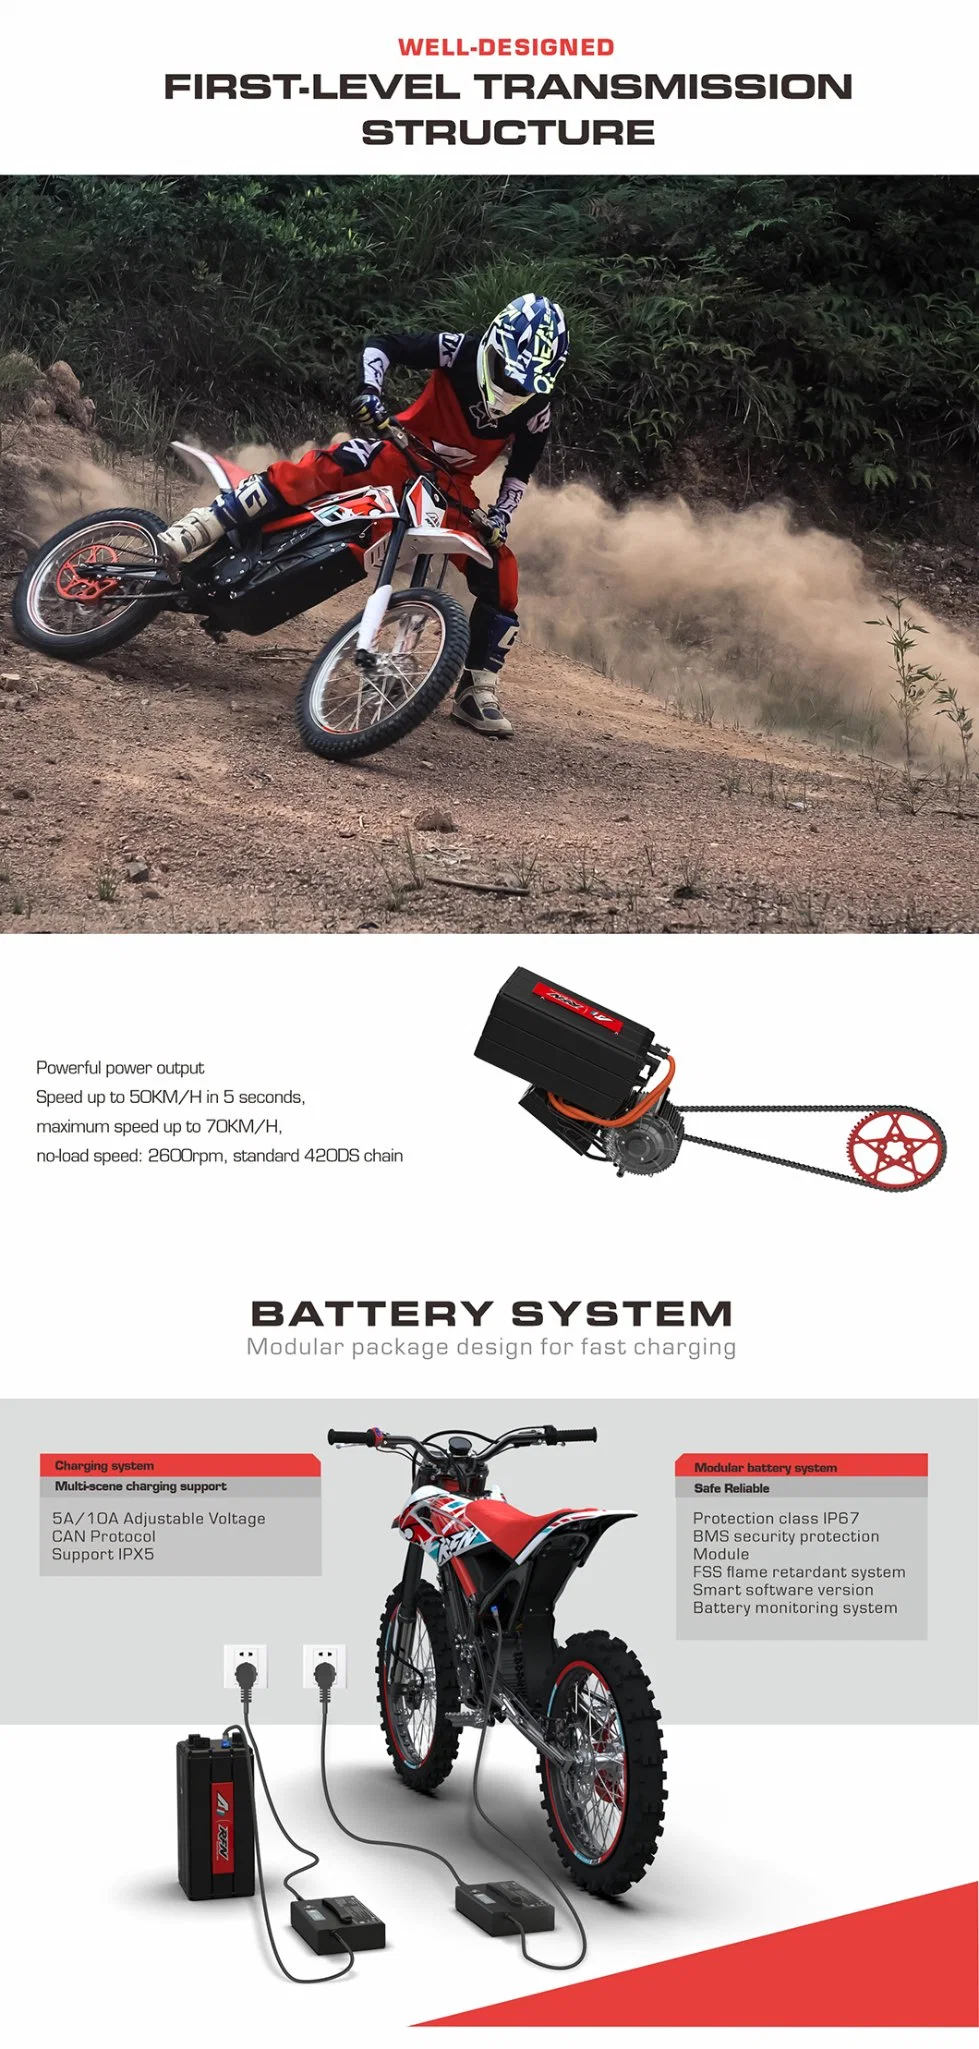 Apollo Rfn Electric Dirt Bike Ares Rally PRO Electric Motorcycle